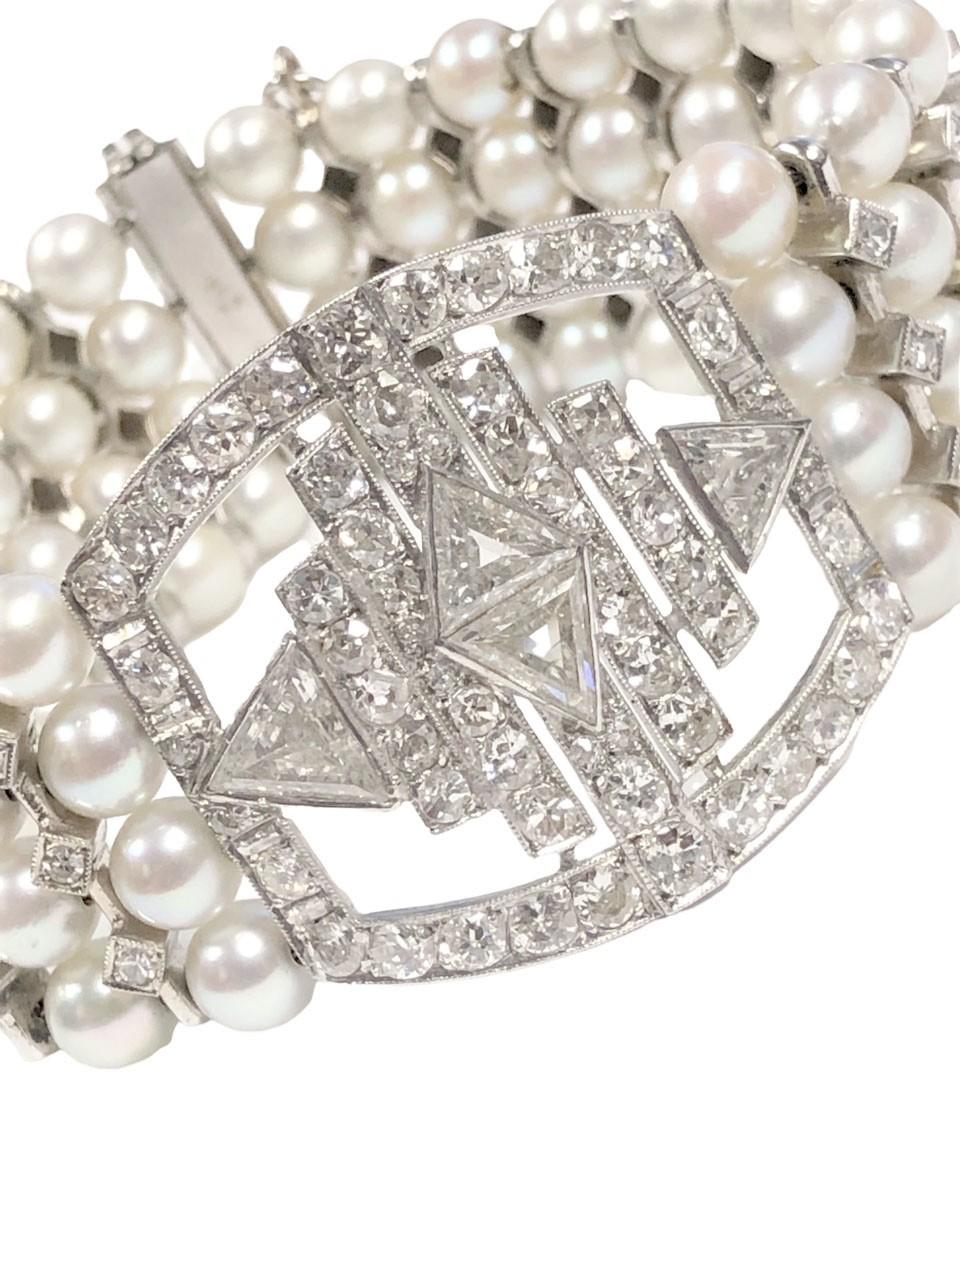 Circa 1930s French Platinum Bracelet in a very Art Deco Style, measuring 7 1/2 inches in length and 1 3/16 inch wide. Comprised of 5.5 M.M. Round Cultured Pearls of fine Luster, the central slightly curved section measures 1 1/4 x 1 3/16 inch and is